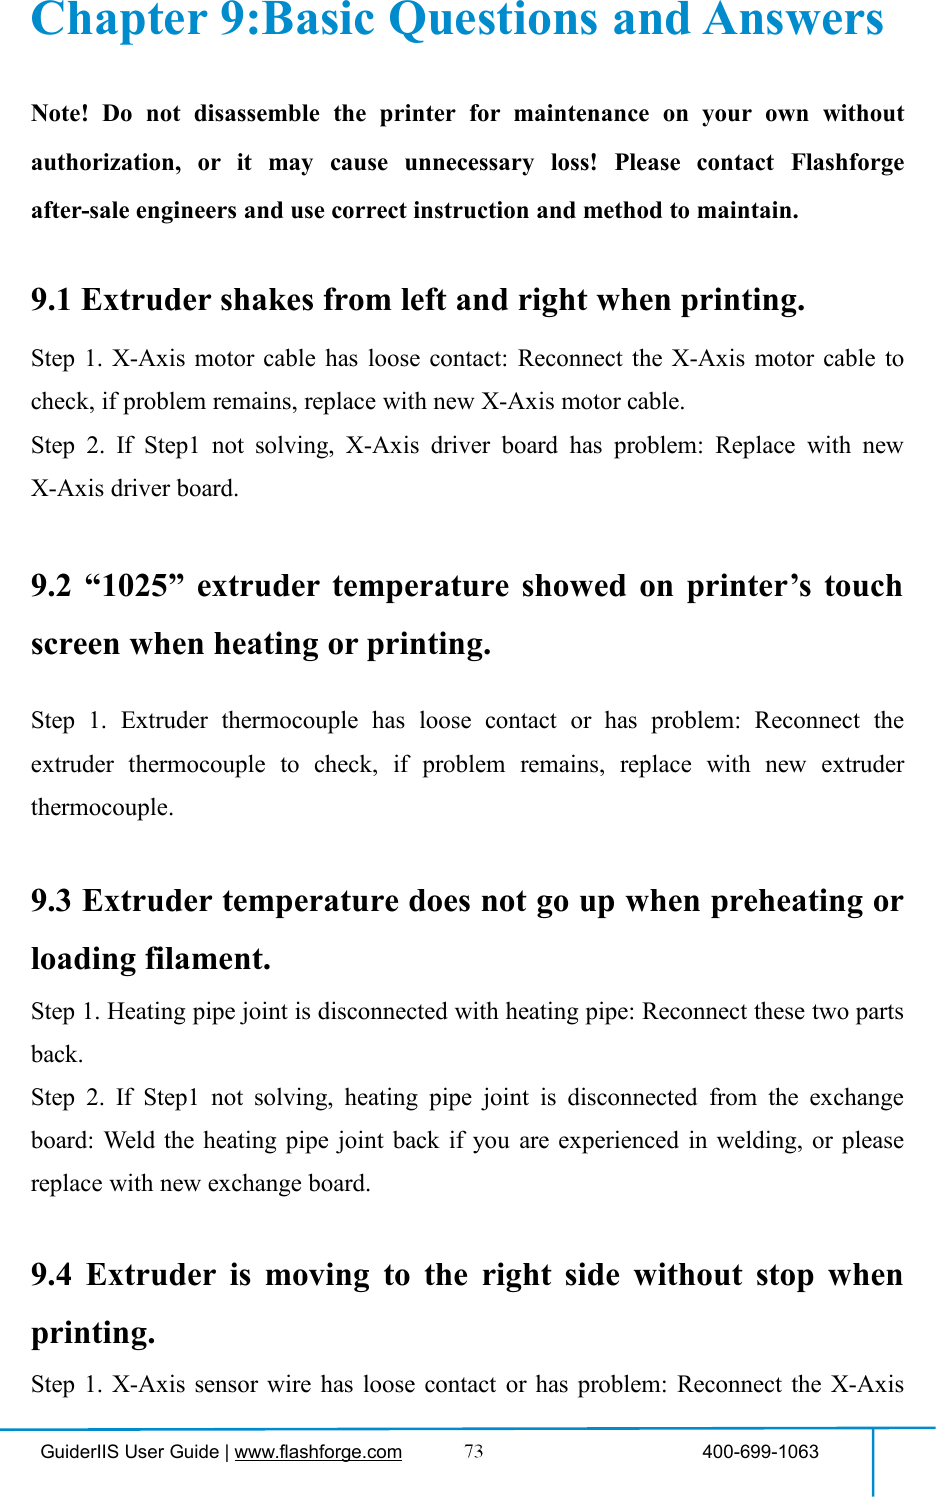 GuiderIIS User Guide | www.flashforge.com 400-699-1063Chapter 9:Basic Questions and AnswersNote! Do not disassemble the printer for maintenance on your own withoutauthorization, or it may cause unnecessary loss! Please contact Flashforgeafter-sale engineers and use correct instruction and method to maintain.9.1 Extruder shakes from left and right when printing.Step 1. X-Axis motor cable has loose contact: Reconnect the X-Axis motor cable tocheck, if problem remains, replace with new X-Axis motor cable.Step 2. If Step1 not solving, X-Axis driver board has problem: Replace with newX-Axis driver board.9.2 “1025” extruder temperature showed on printer’s touchscreen when heating or printing.Step 1. Extruder thermocouple has loose contact or has problem: Reconnect theextruder thermocouple to check, if problem remains, replace with new extruderthermocouple.9.3 Extruder temperature does not go up when preheating orloading filament.Step 1. Heating pipe joint is disconnected with heating pipe: Reconnect these two partsback.Step 2. If Step1 not solving, heating pipe joint is disconnected from the exchangeboard: Weld the heating pipe joint back if you are experienced in welding, or pleasereplace with new exchange board.9.4 Extruder is moving to the right side without stop whenprinting.Step 1. X-Axis sensor wire has loose contact or has problem: Reconnect the X-Axis